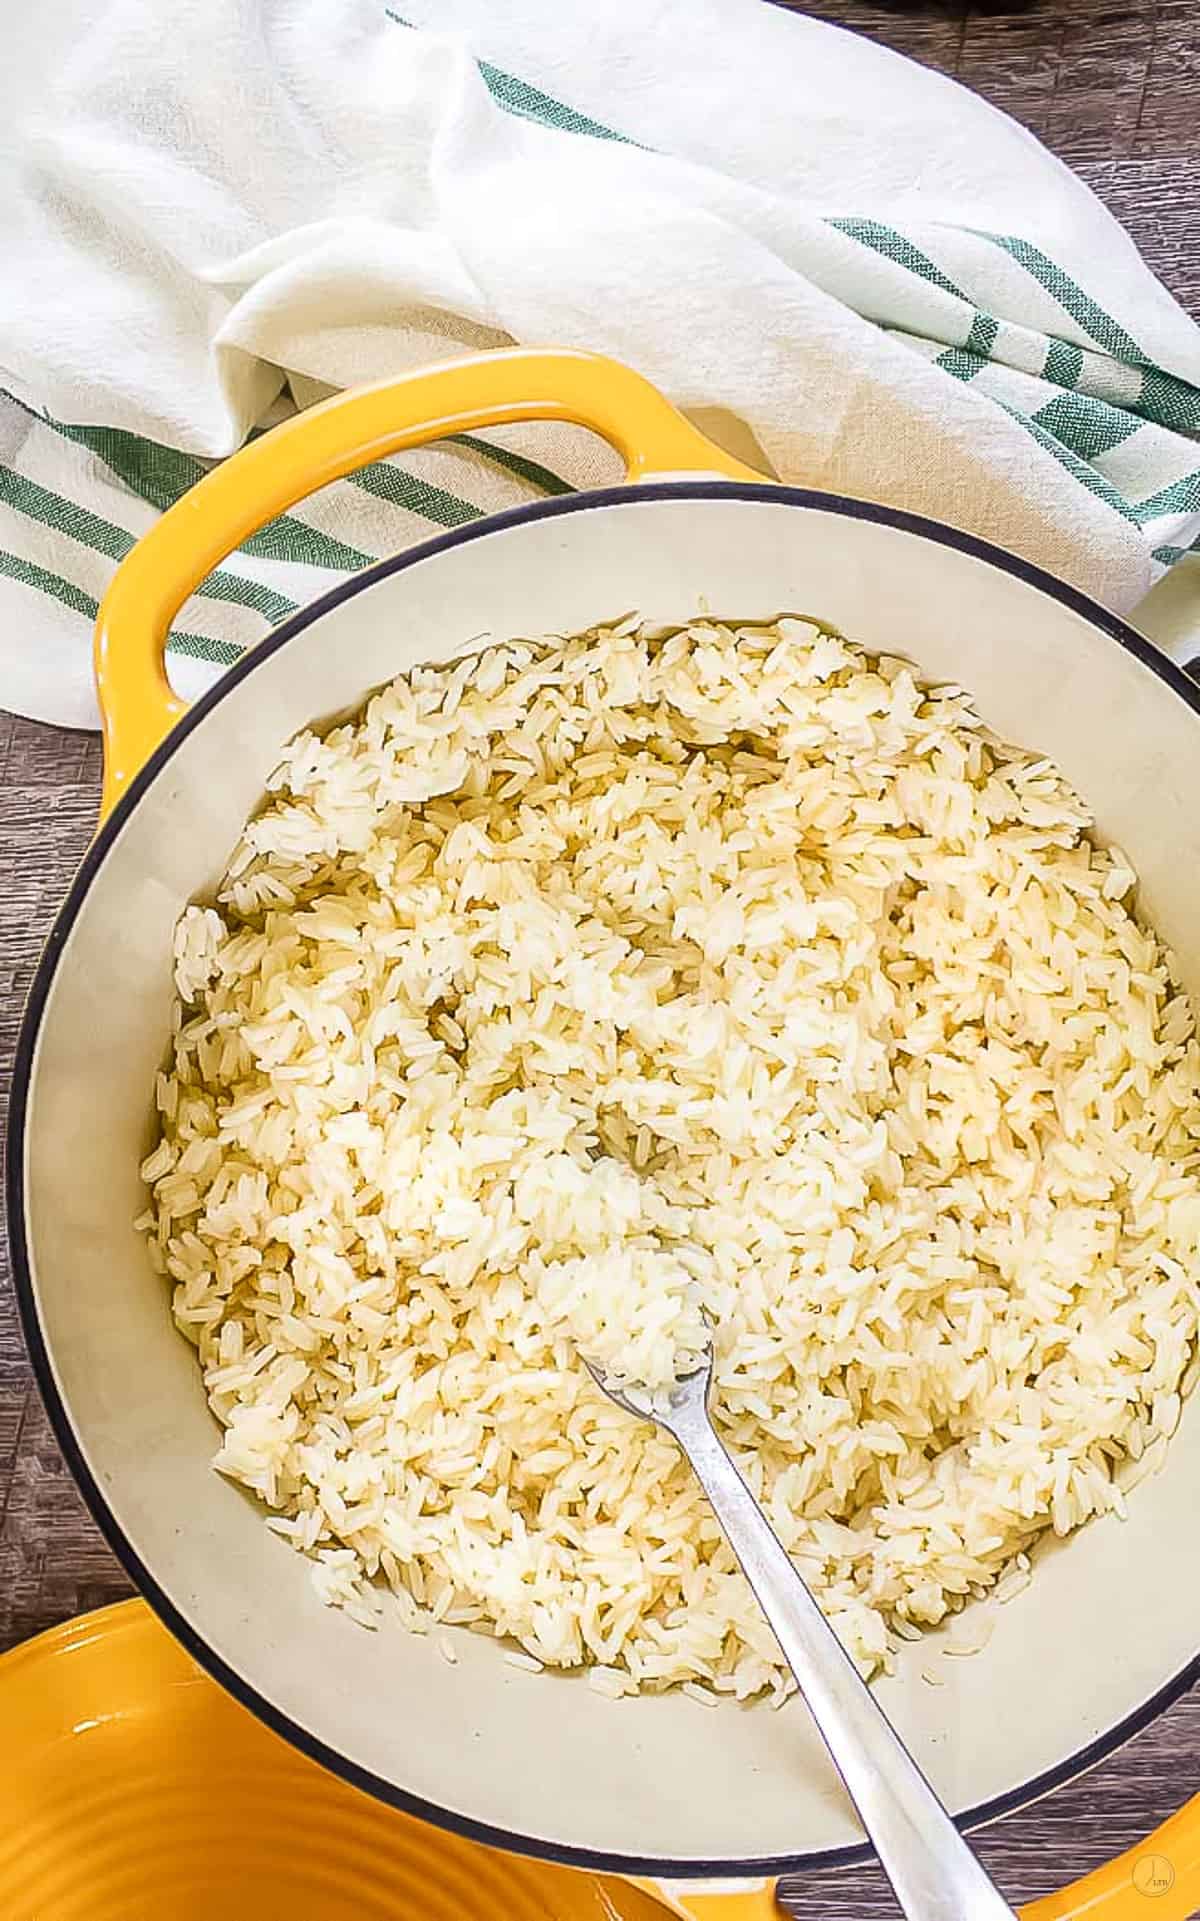 baked white rice in a yellow dutch oven. Fork in the rice and green and white striped napkin on the left